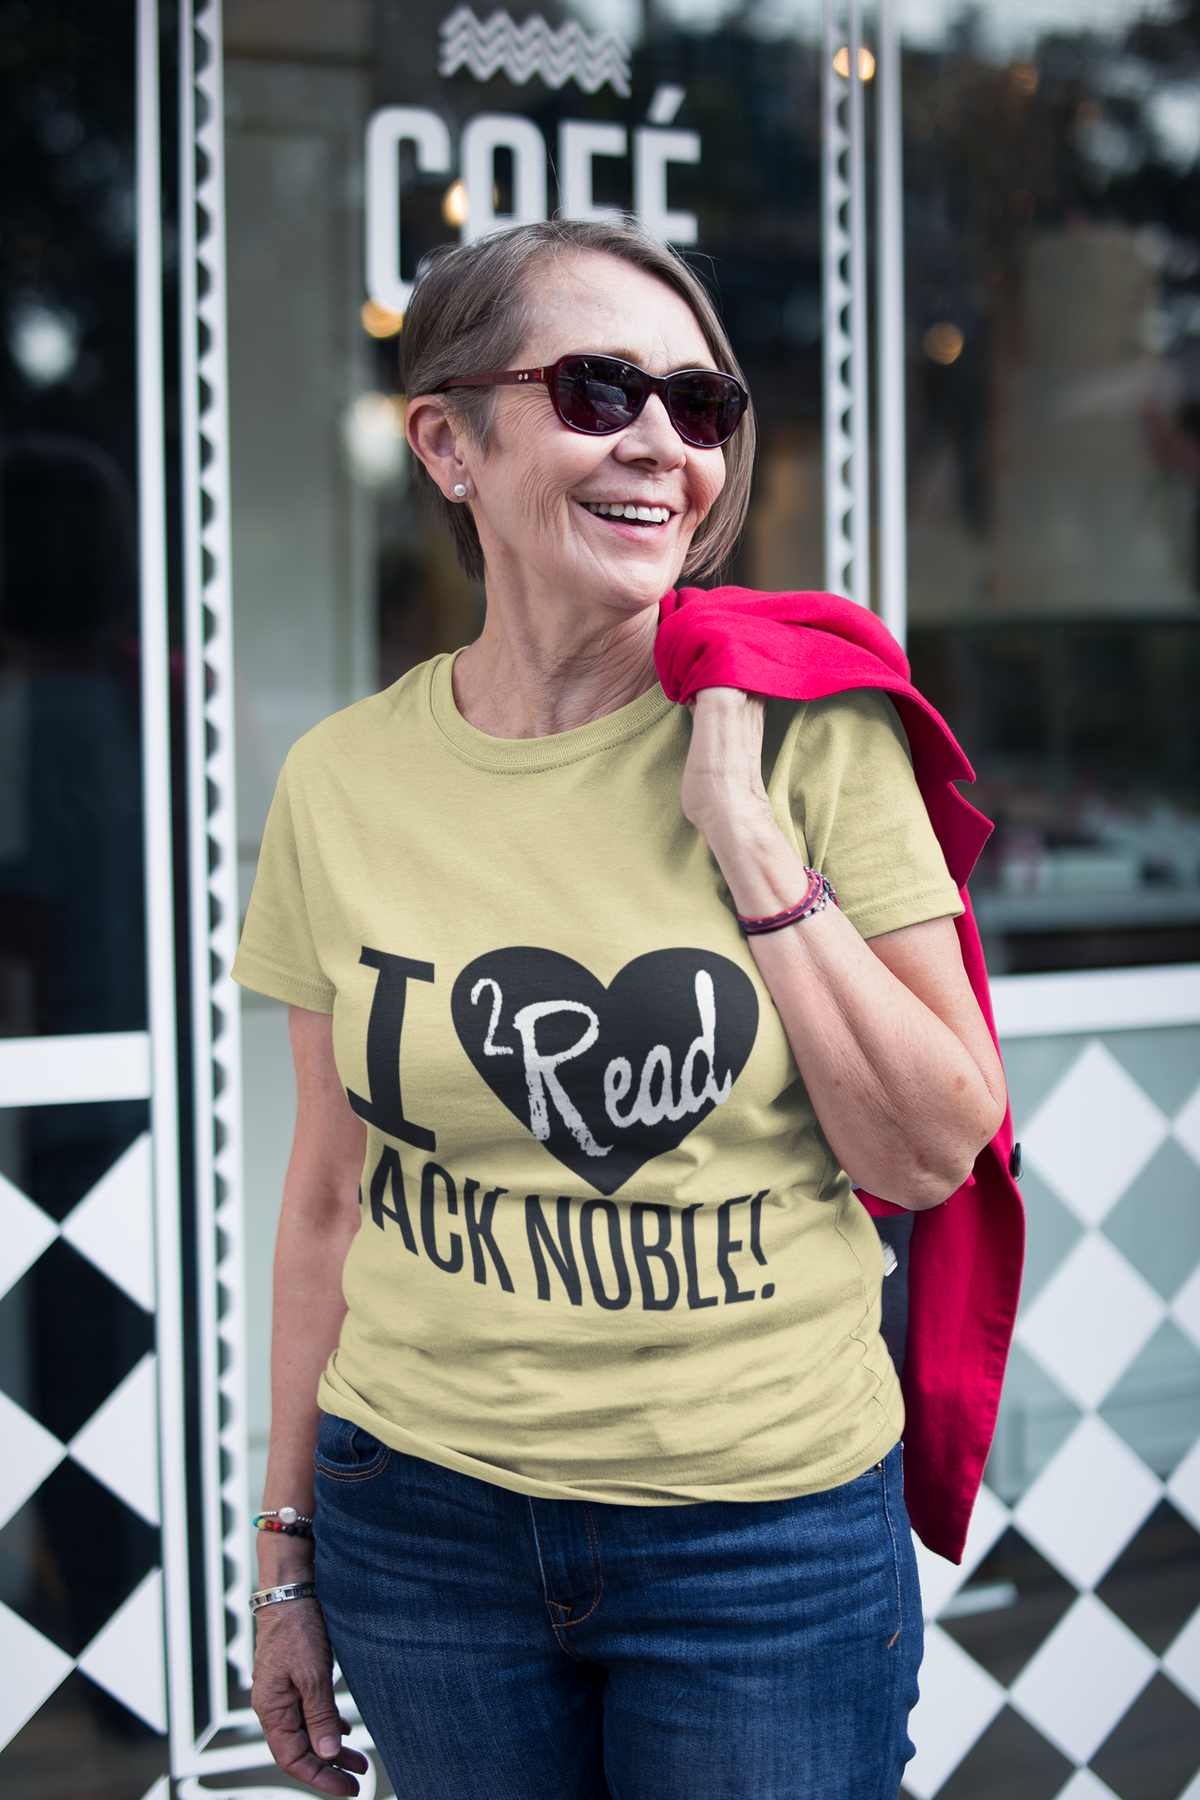 I Love to Read Jack Noble Tee